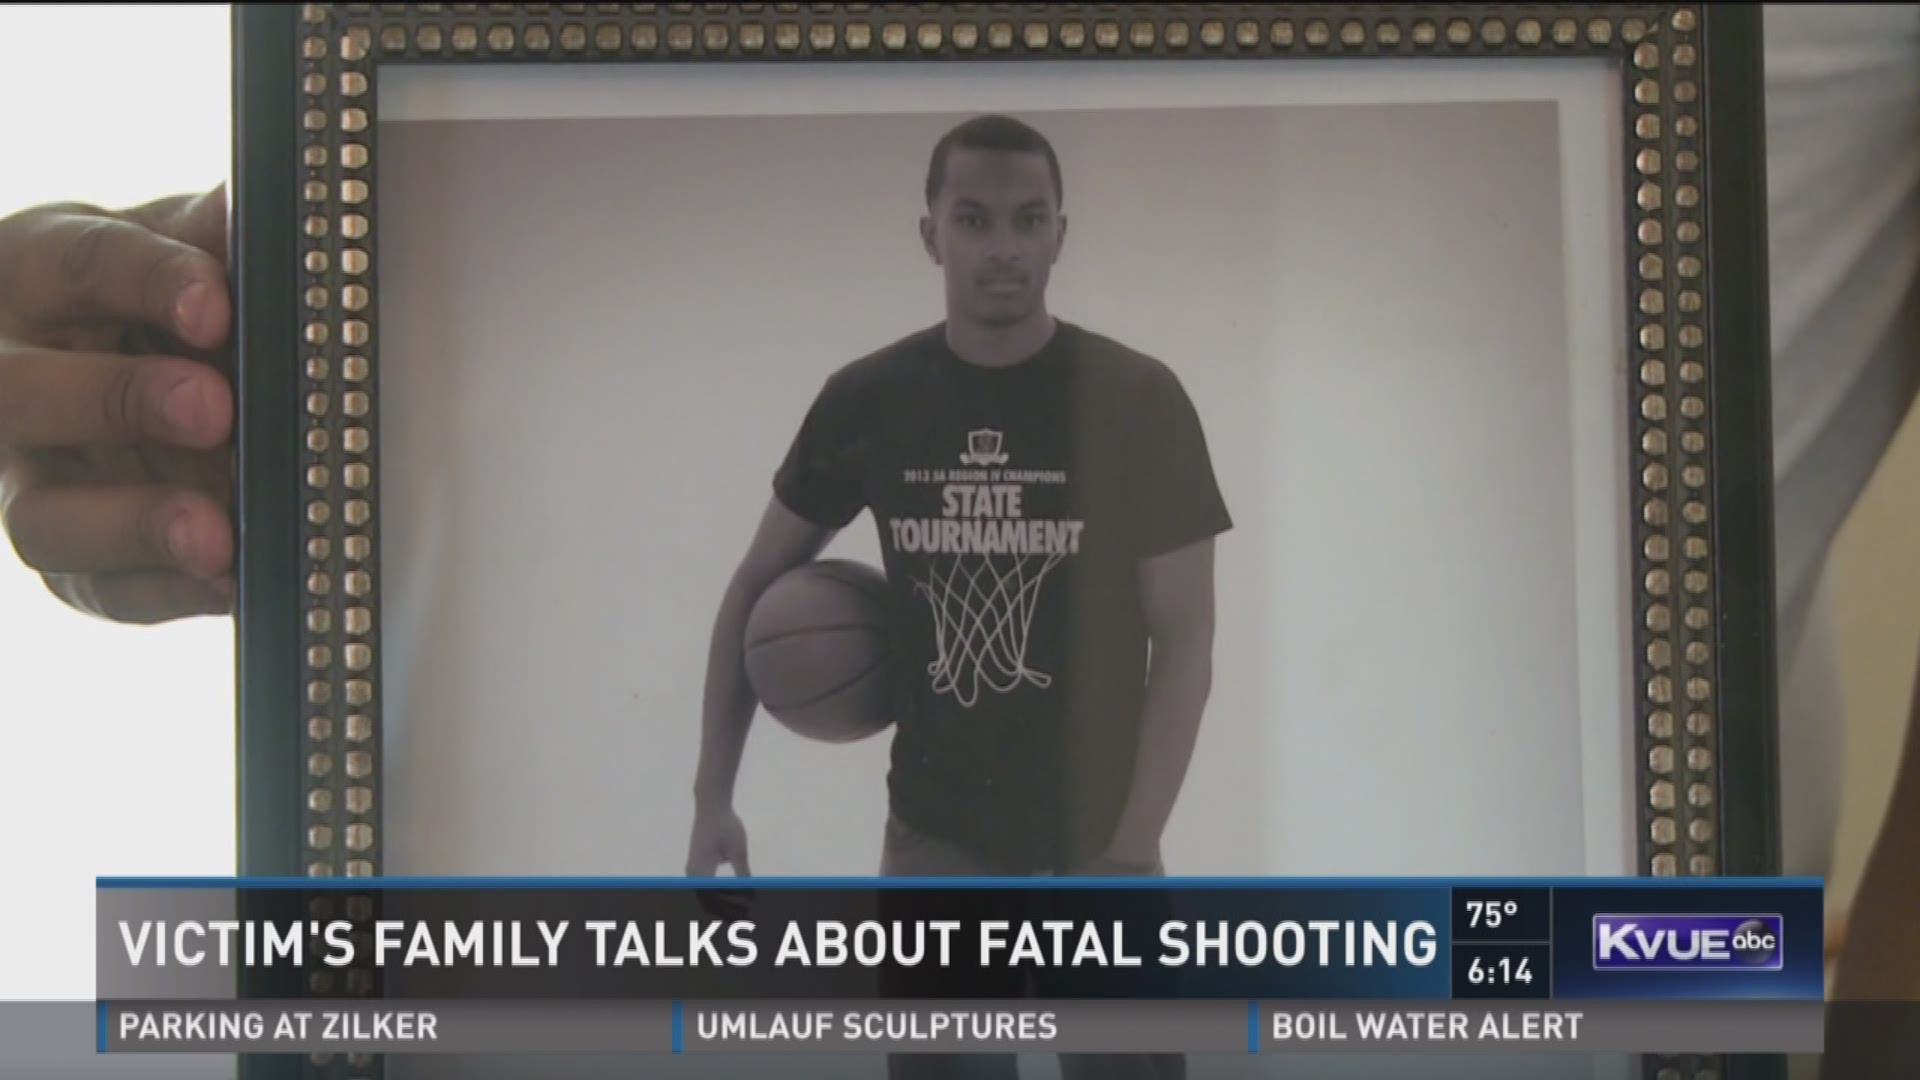 Victim's family talks about fatal shooting